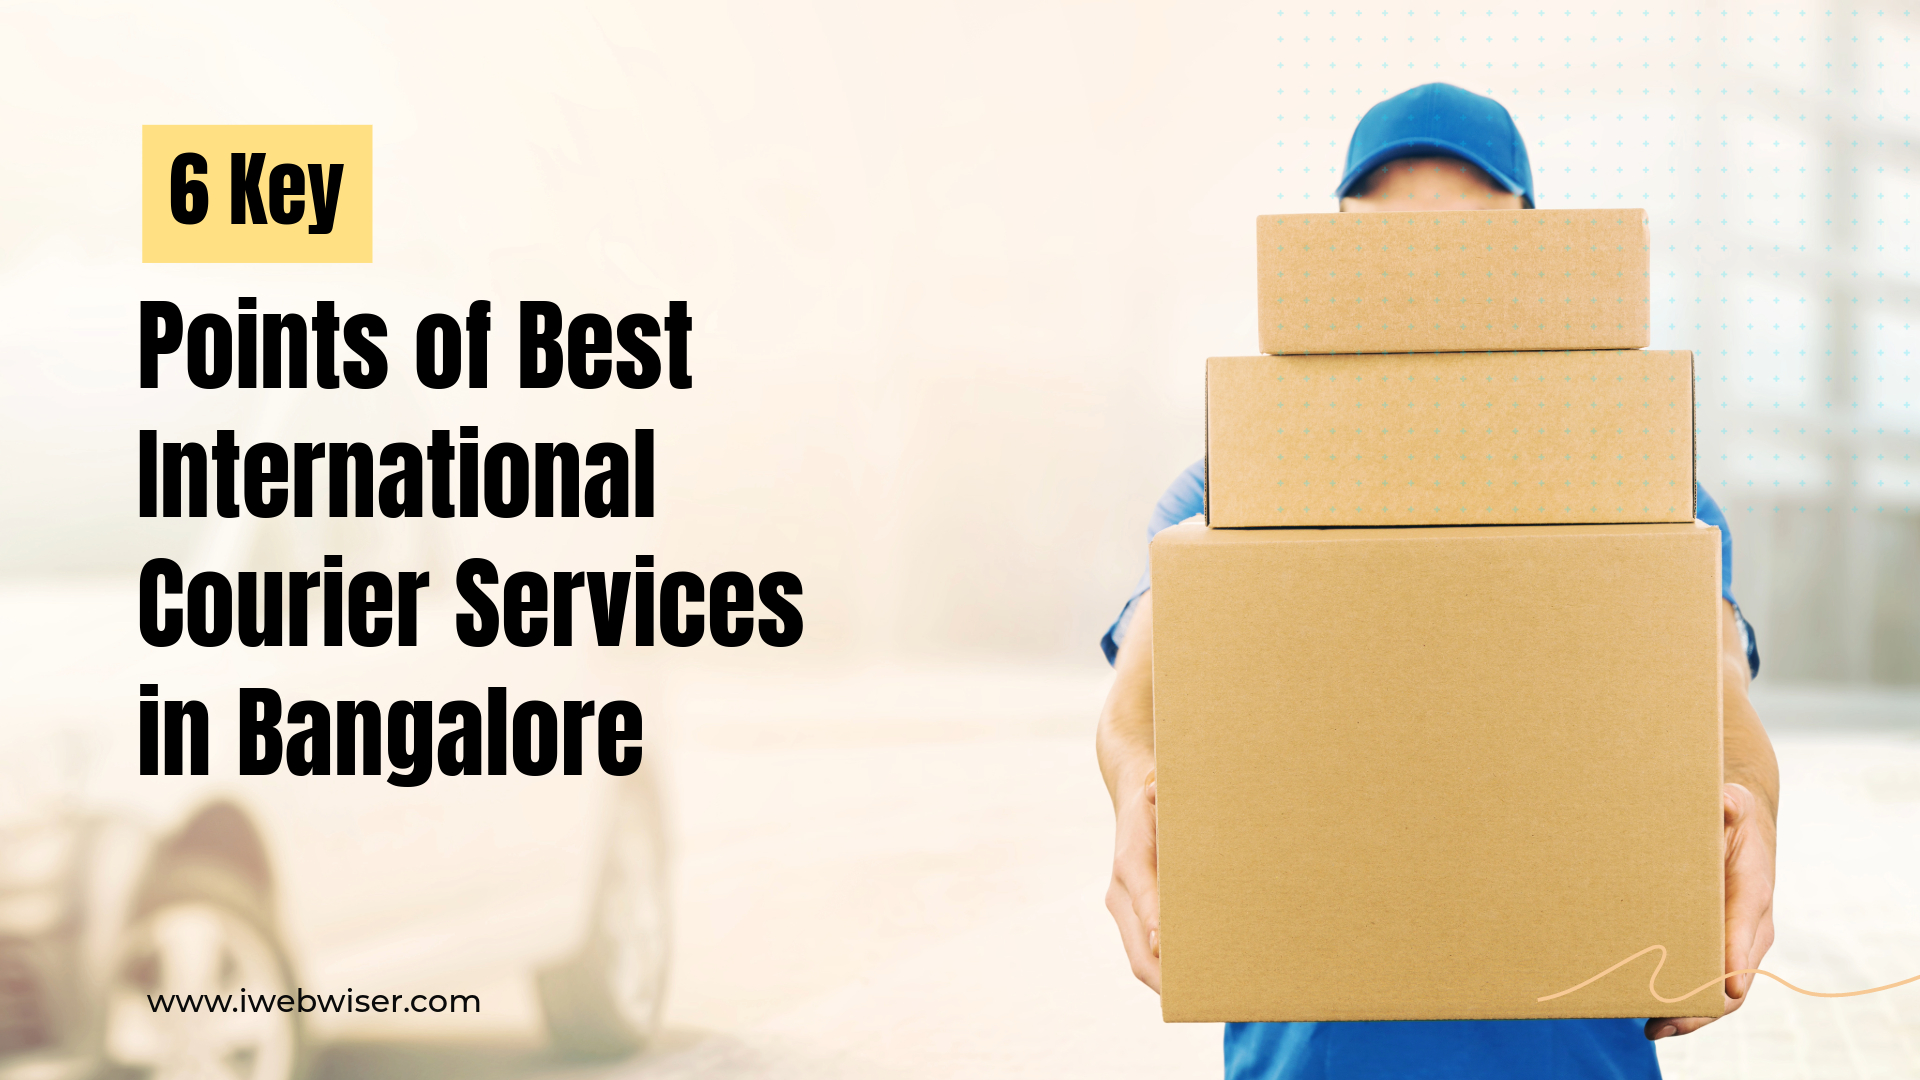 6-Key-Points-of-International-Courier-Services-in-Bangalore